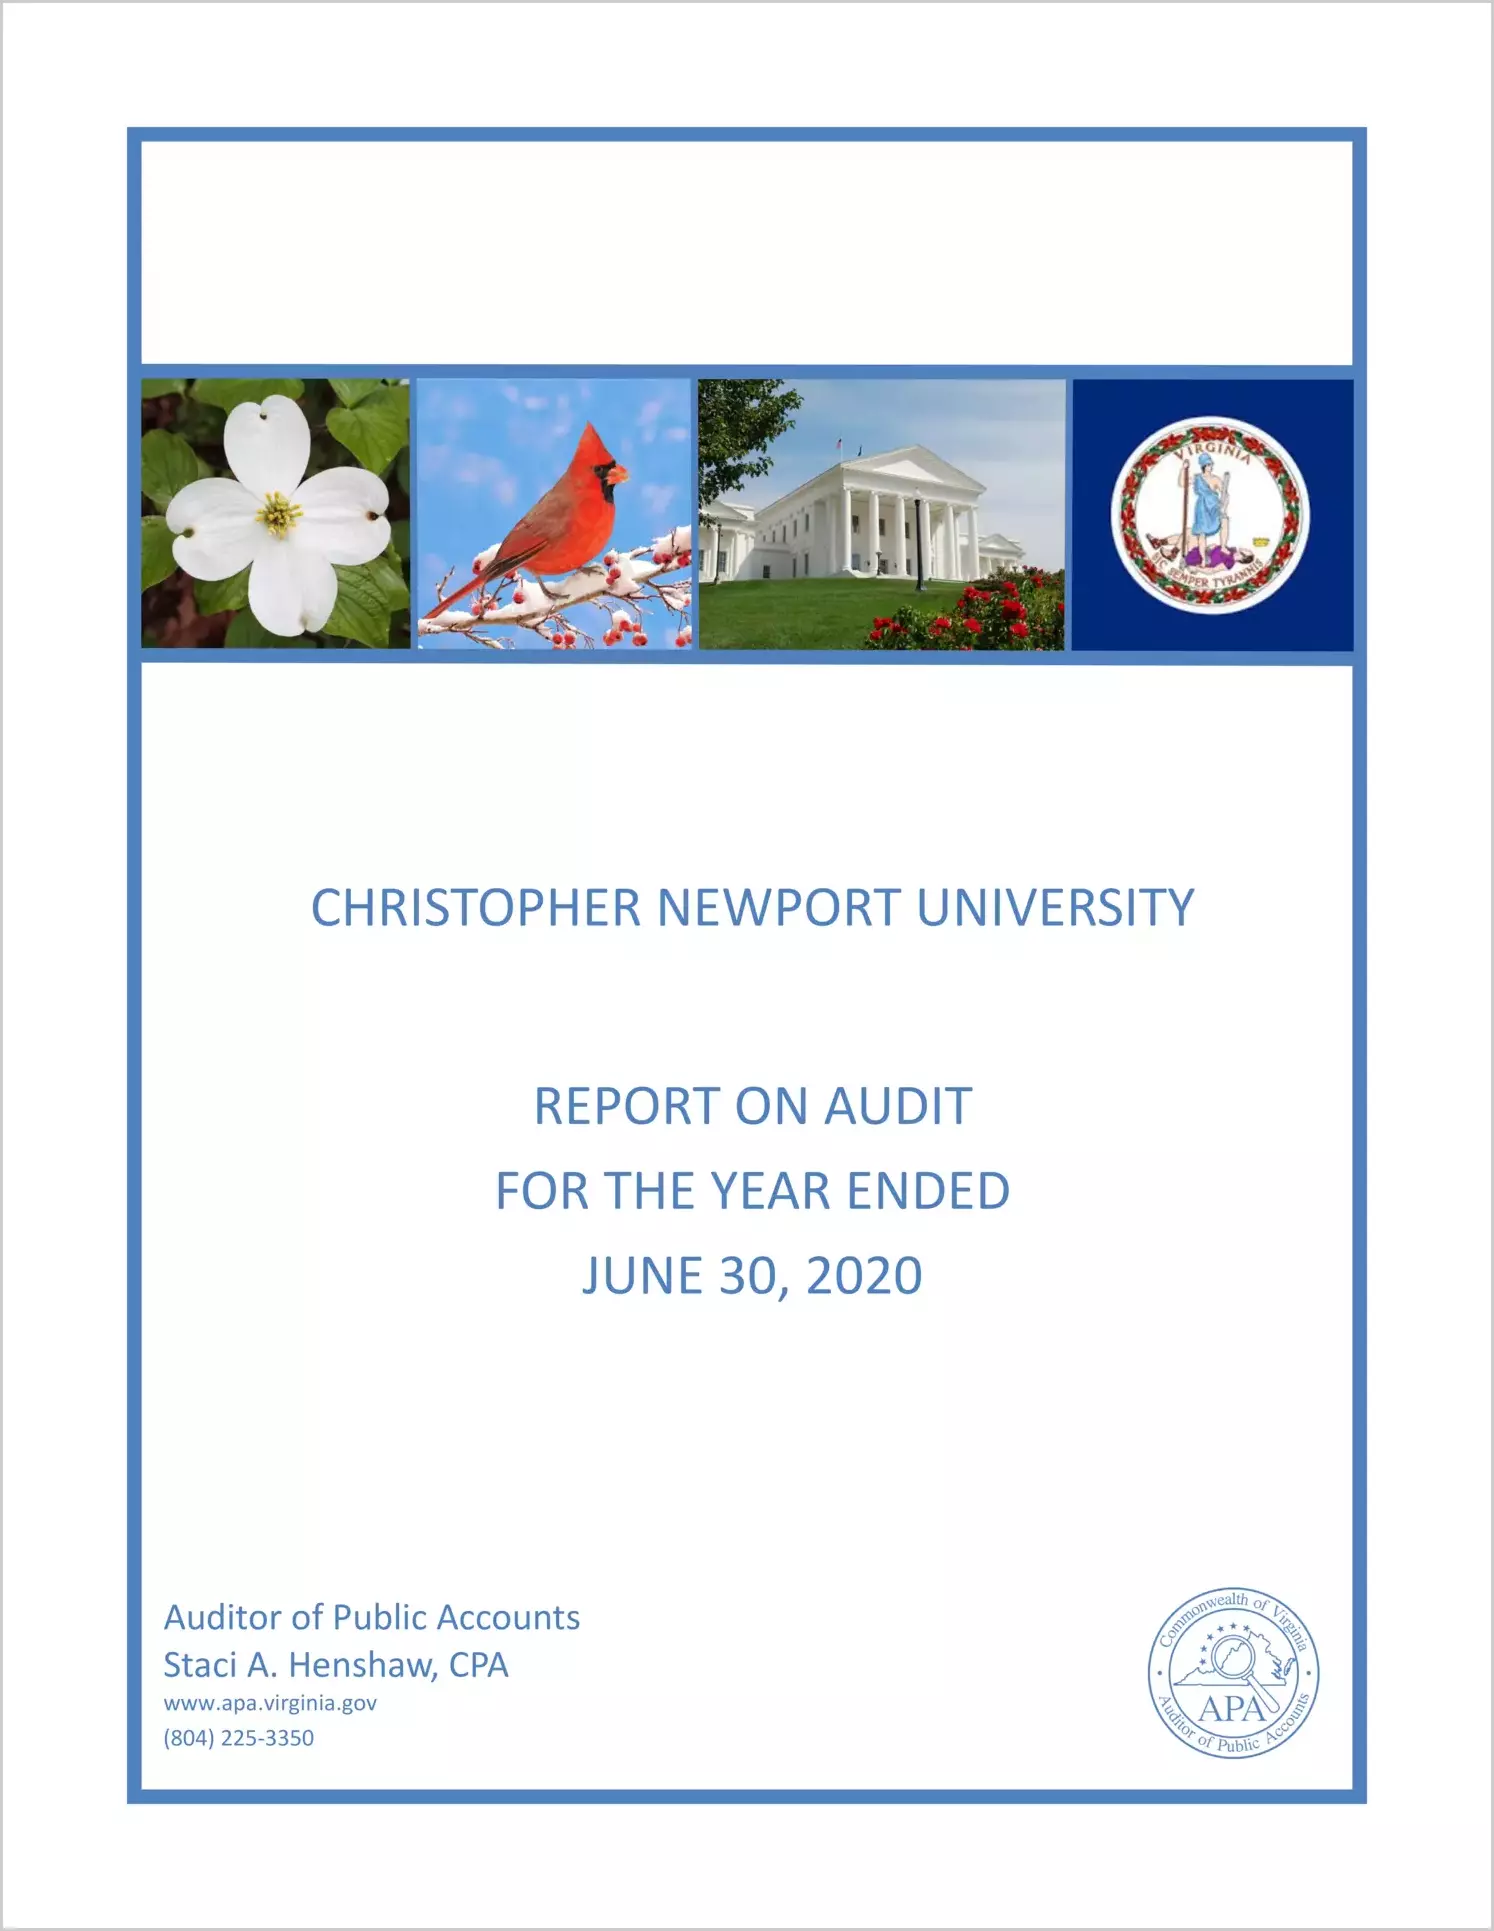 Christopher Newport University for the year ended June 30, 2020